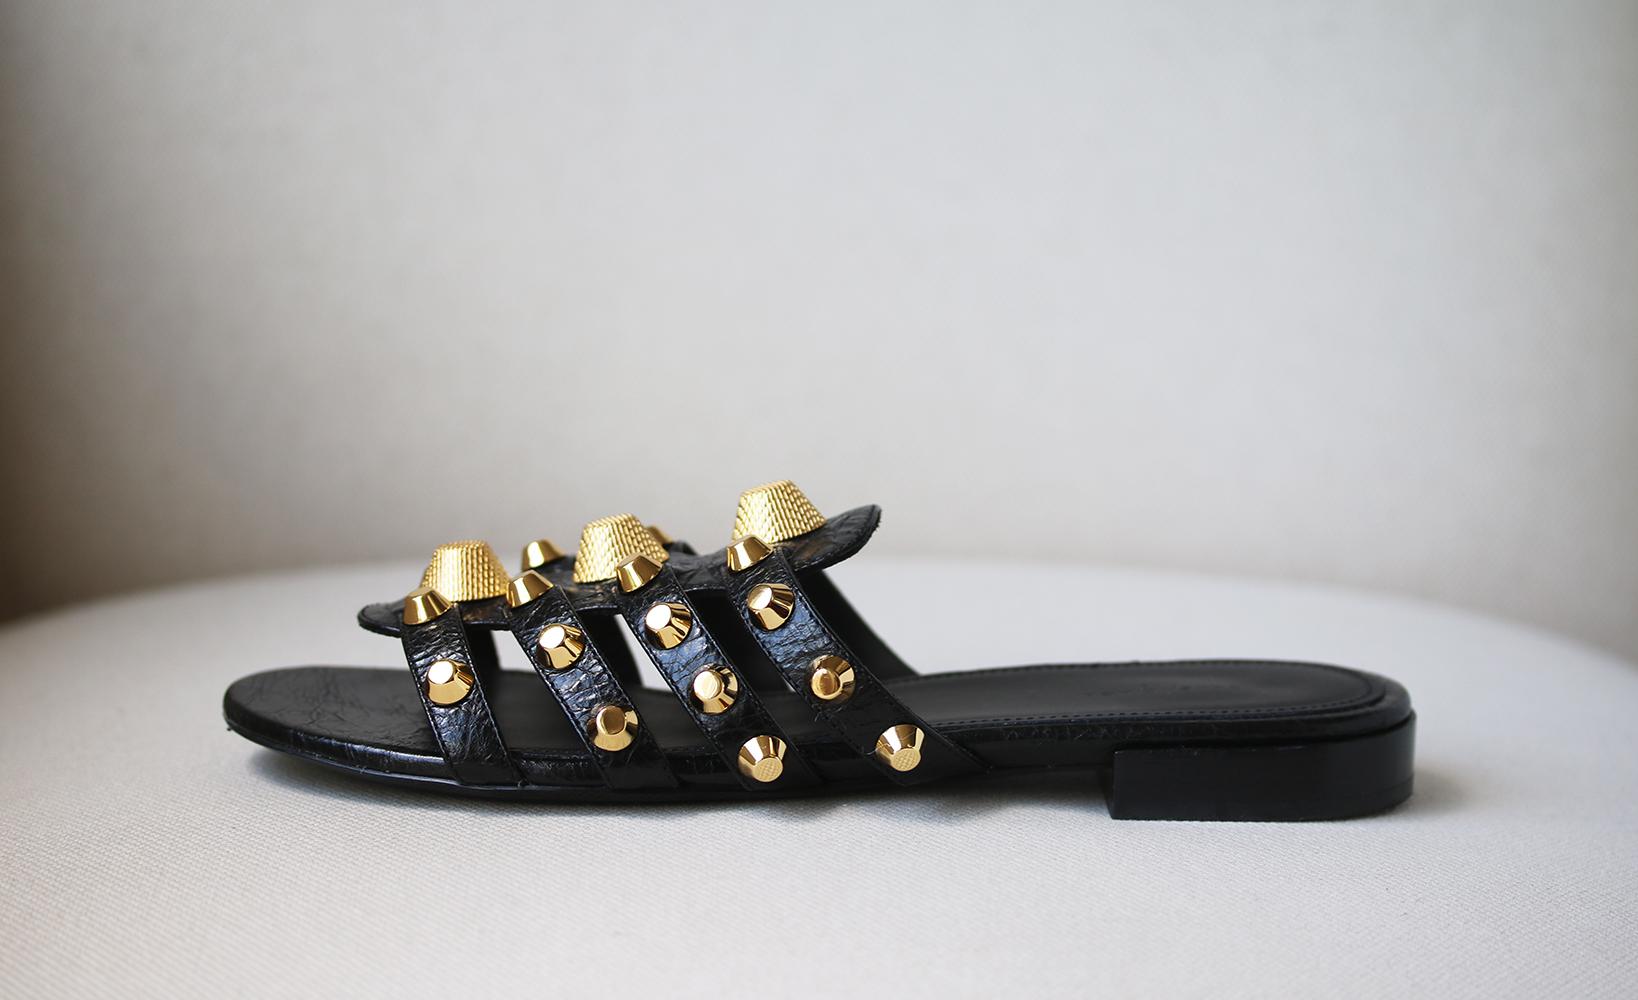 Balenciaga's 'Giant' slides are embellished with the same signature thimble-inspired studs as the brand's 'City' tote. This gladiator style is made from glossy textured-leather and has a caged vamp that elegantly frames your foot. Slight heel. Black